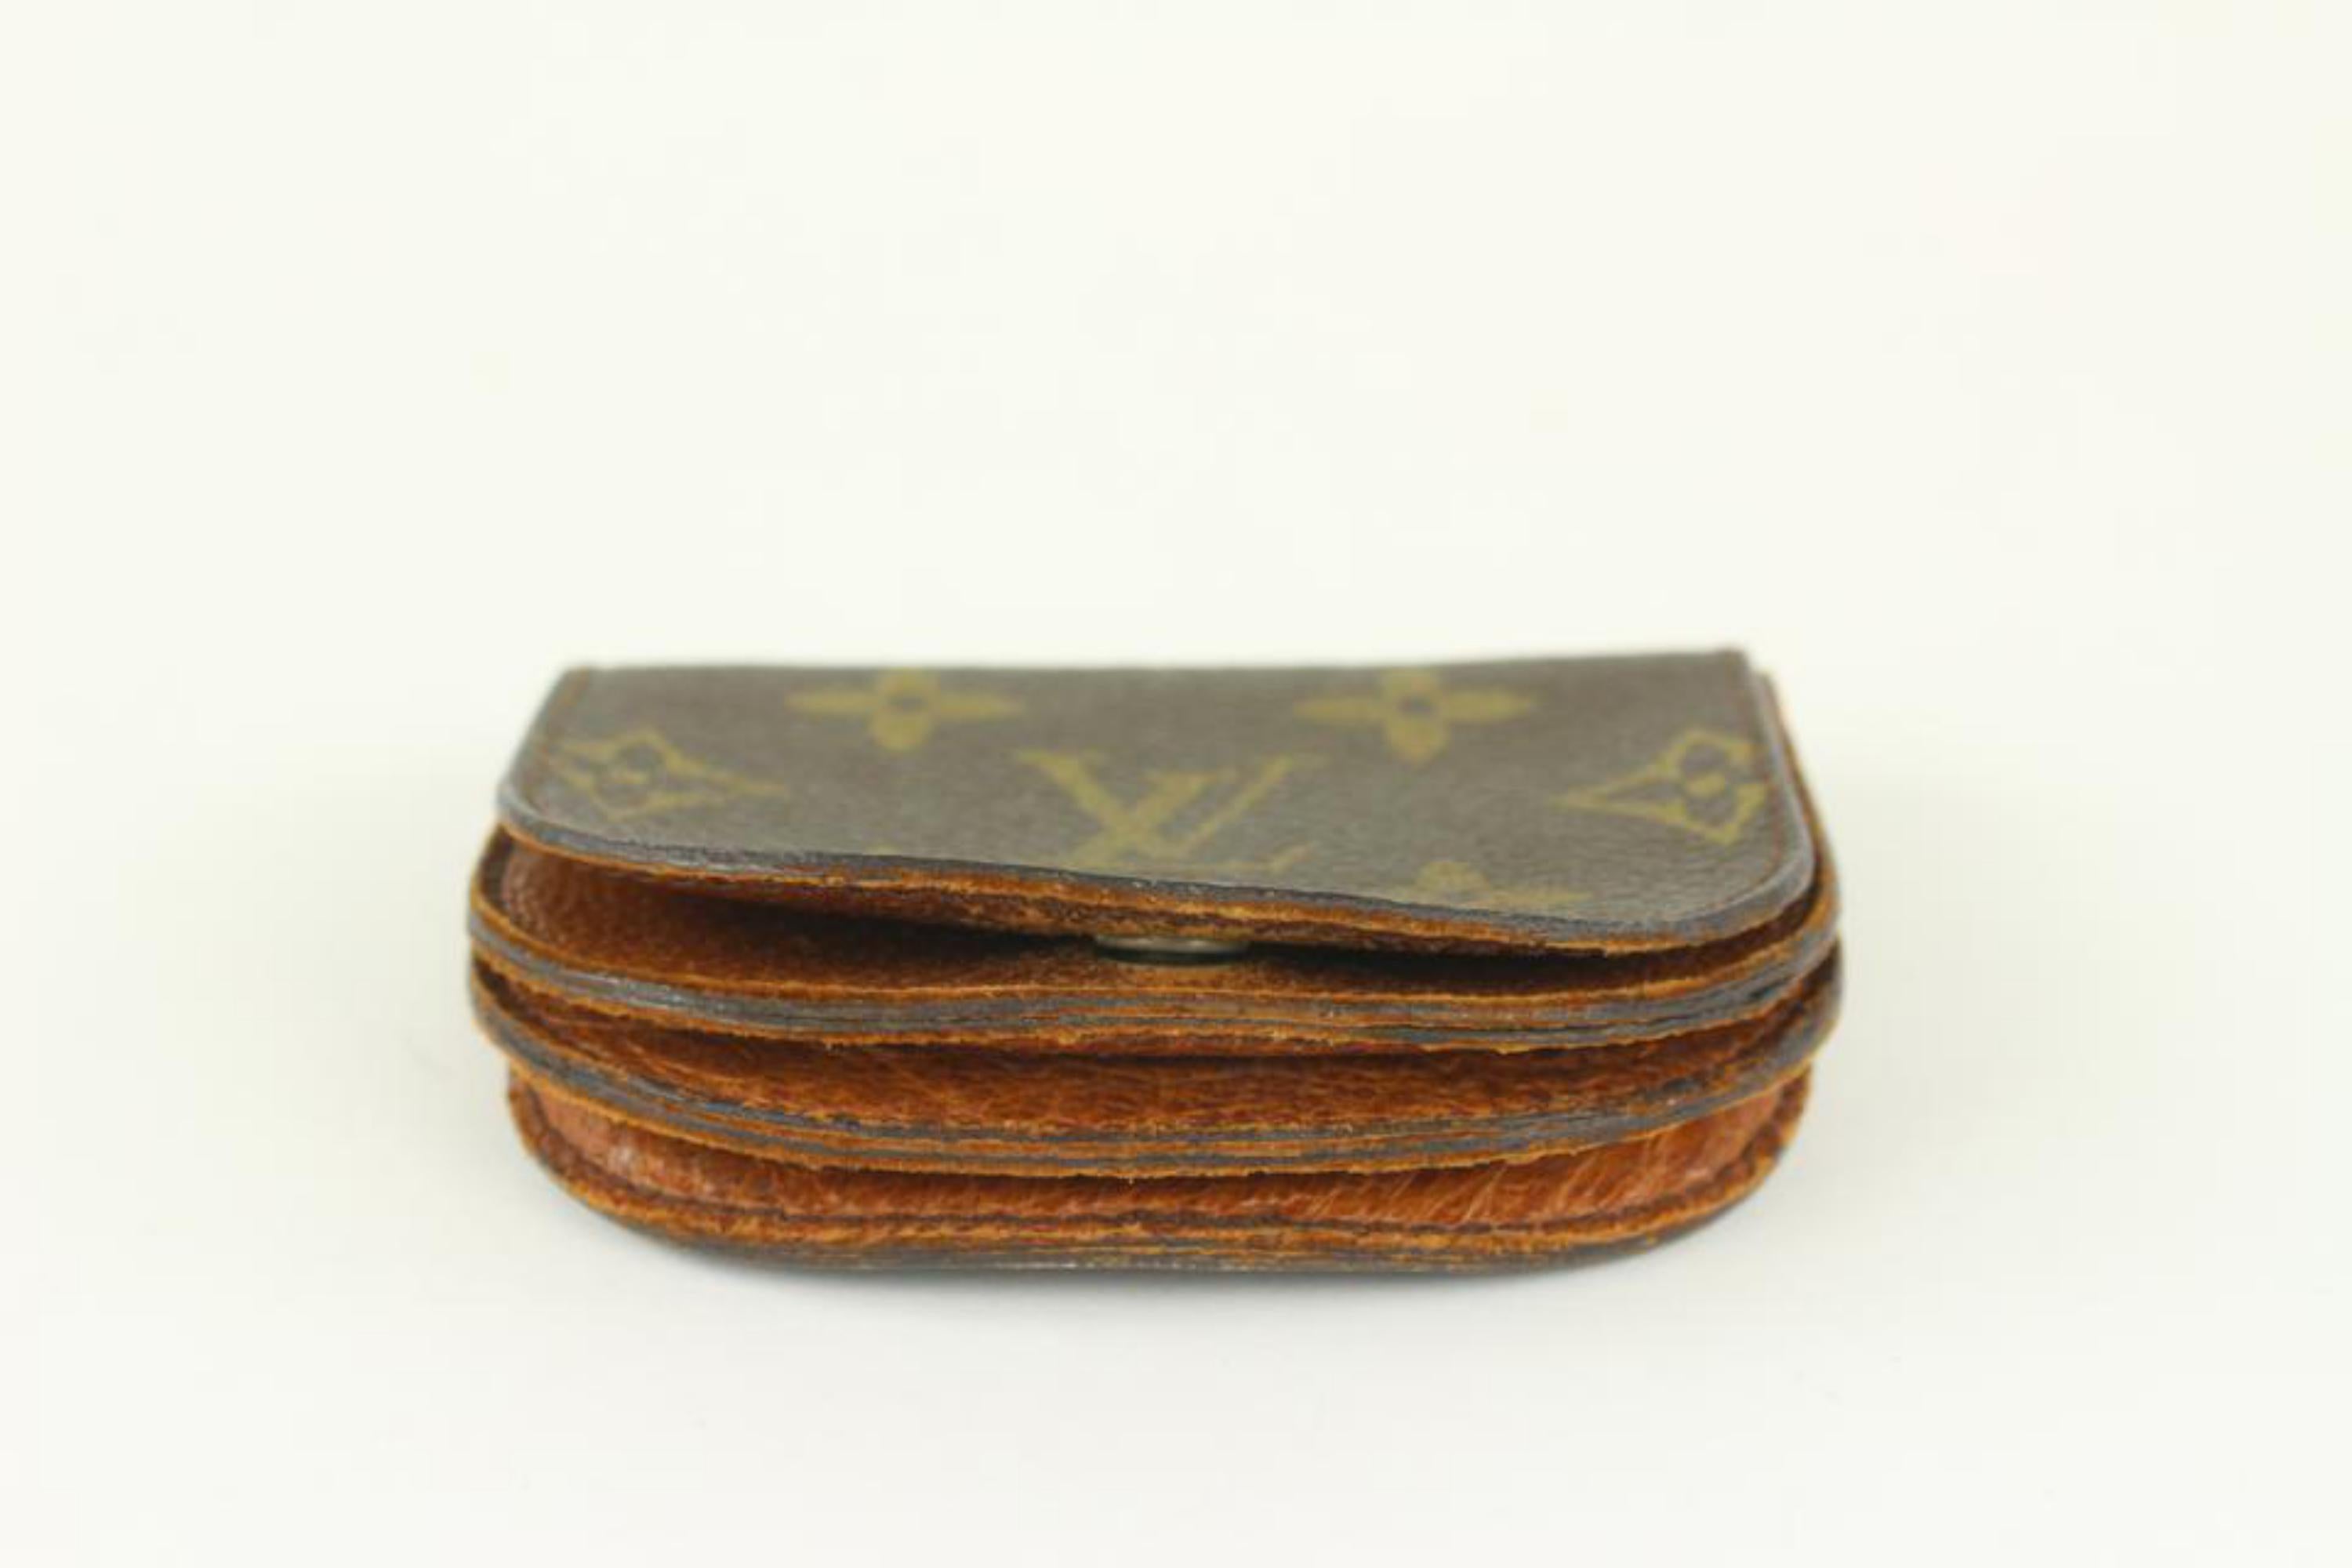 Louis Vuitton Monogram Coin Purse Change Pouch Demi Ronde 12lv1027 In Fair Condition For Sale In Dix hills, NY